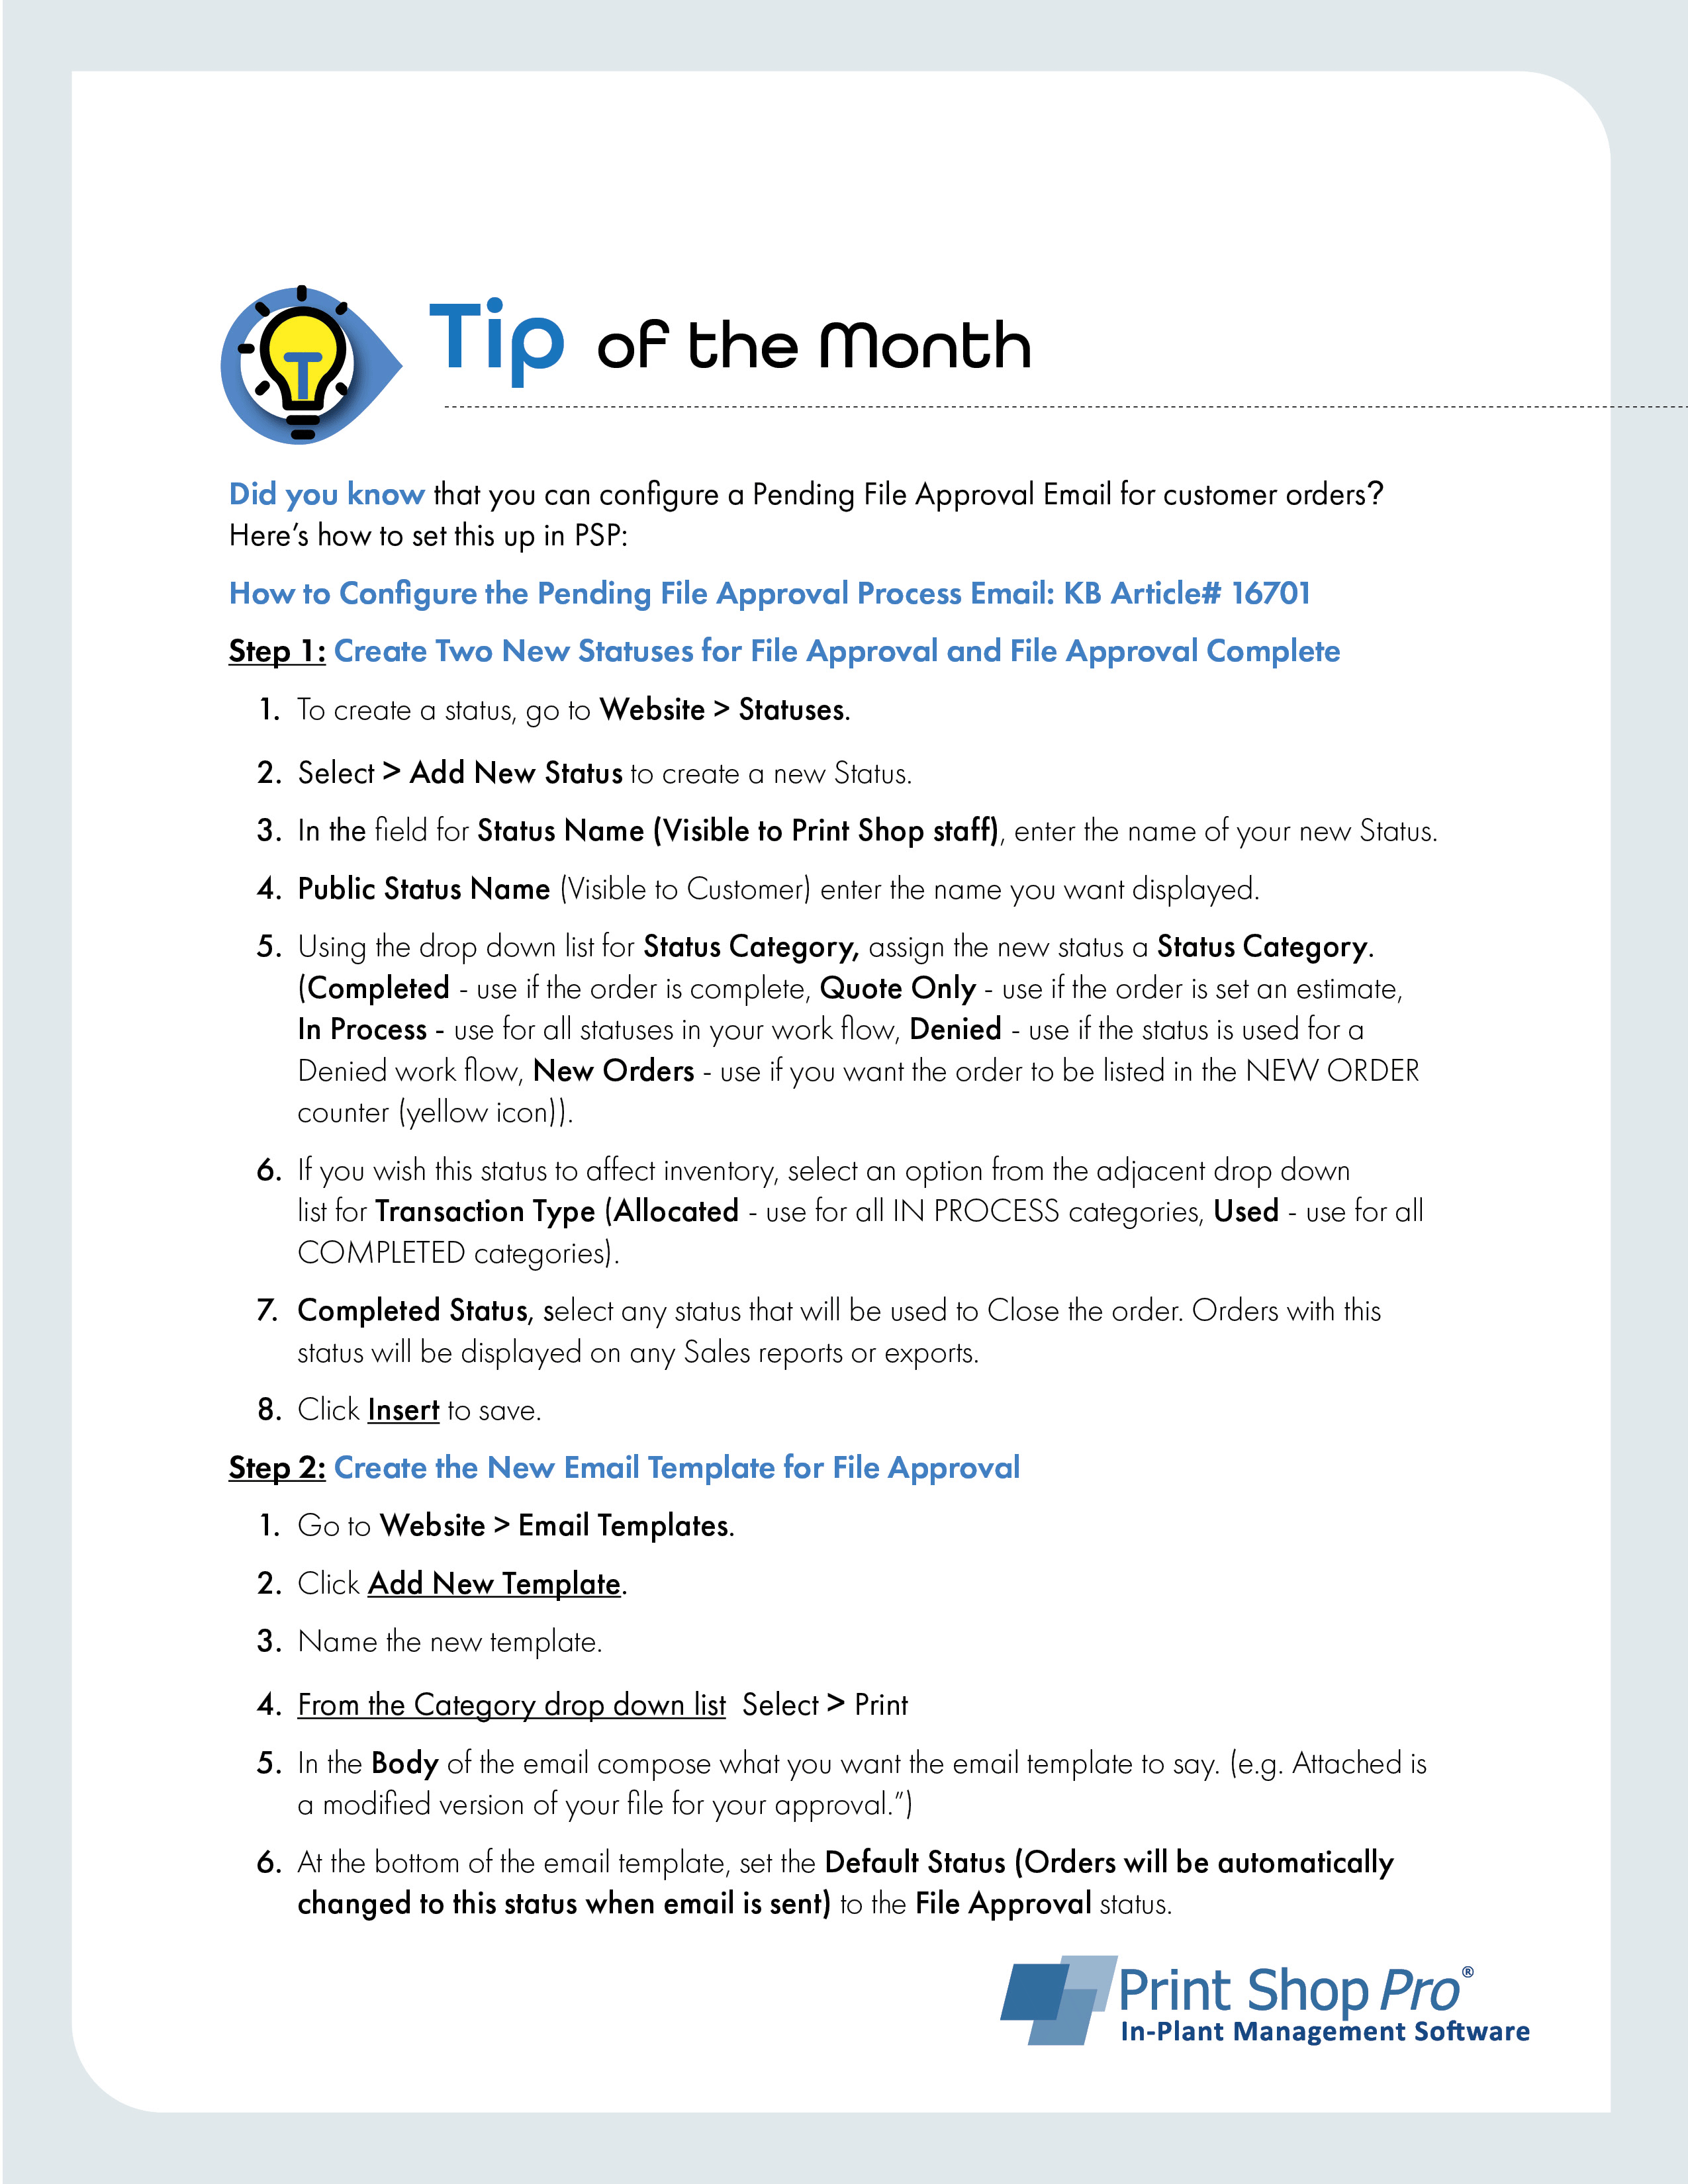 October Tip of the Month